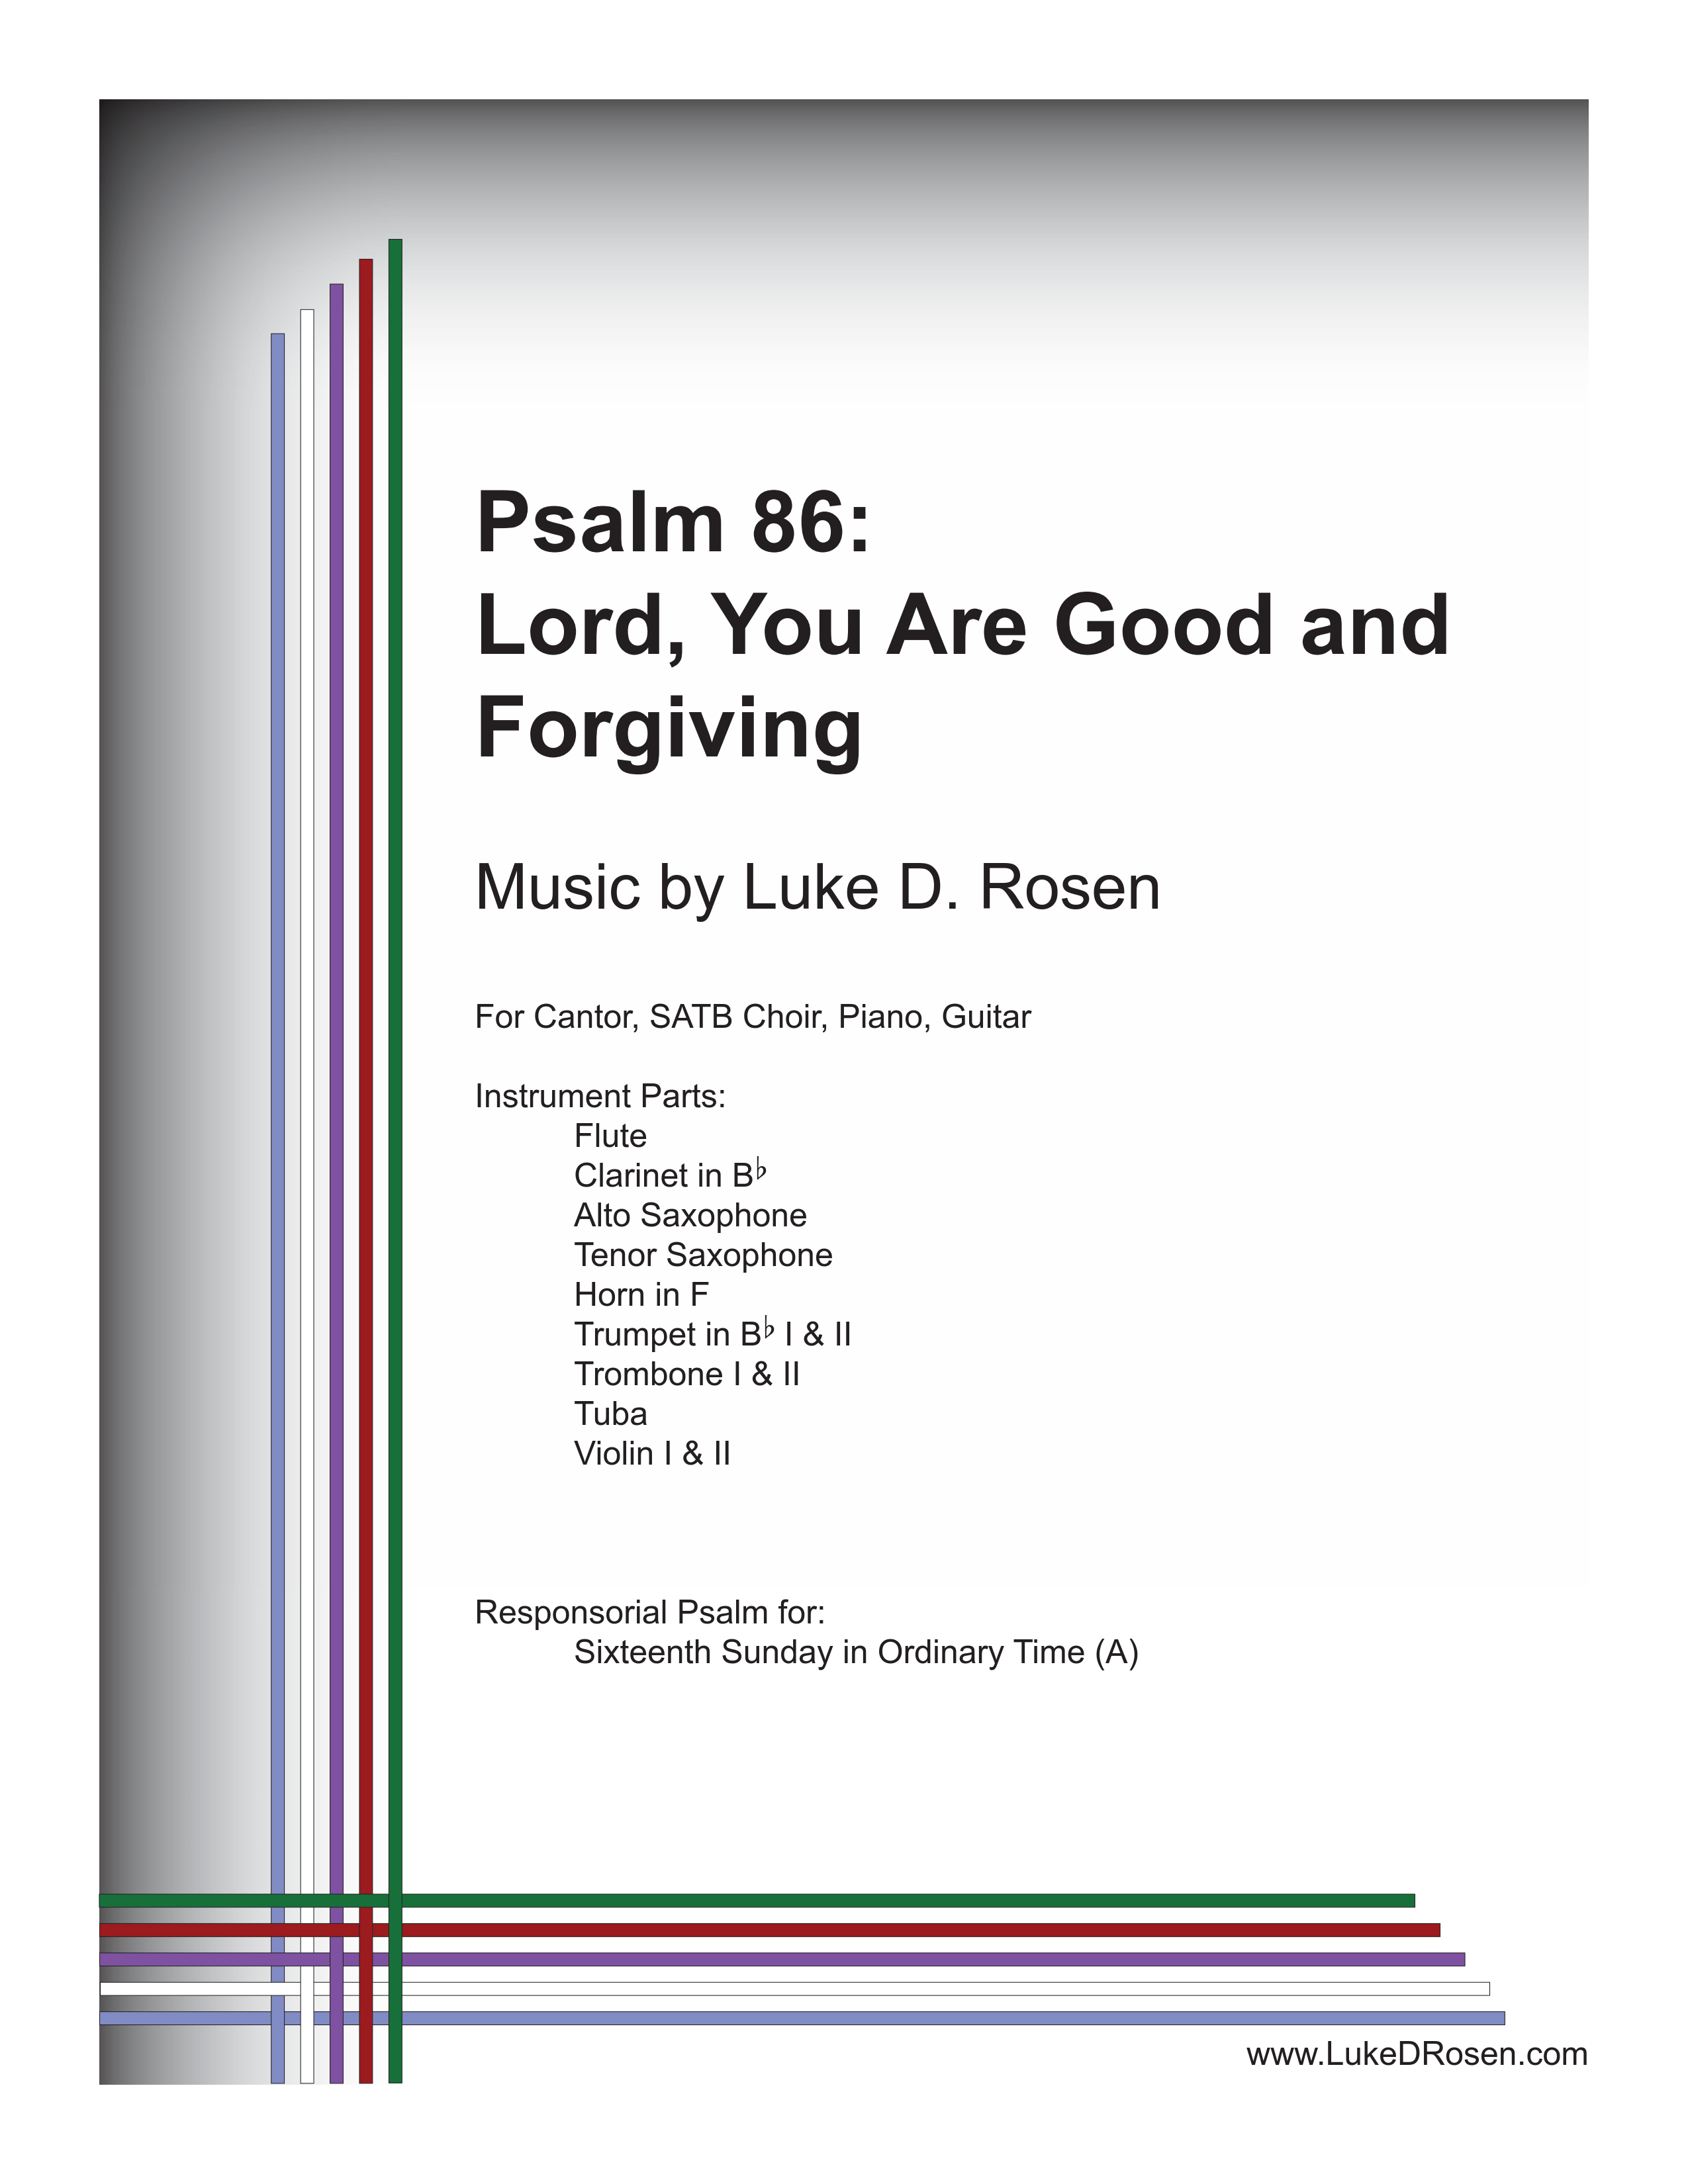 Psalm 86 – Lord You Are Good and Forgiving (Rosen)